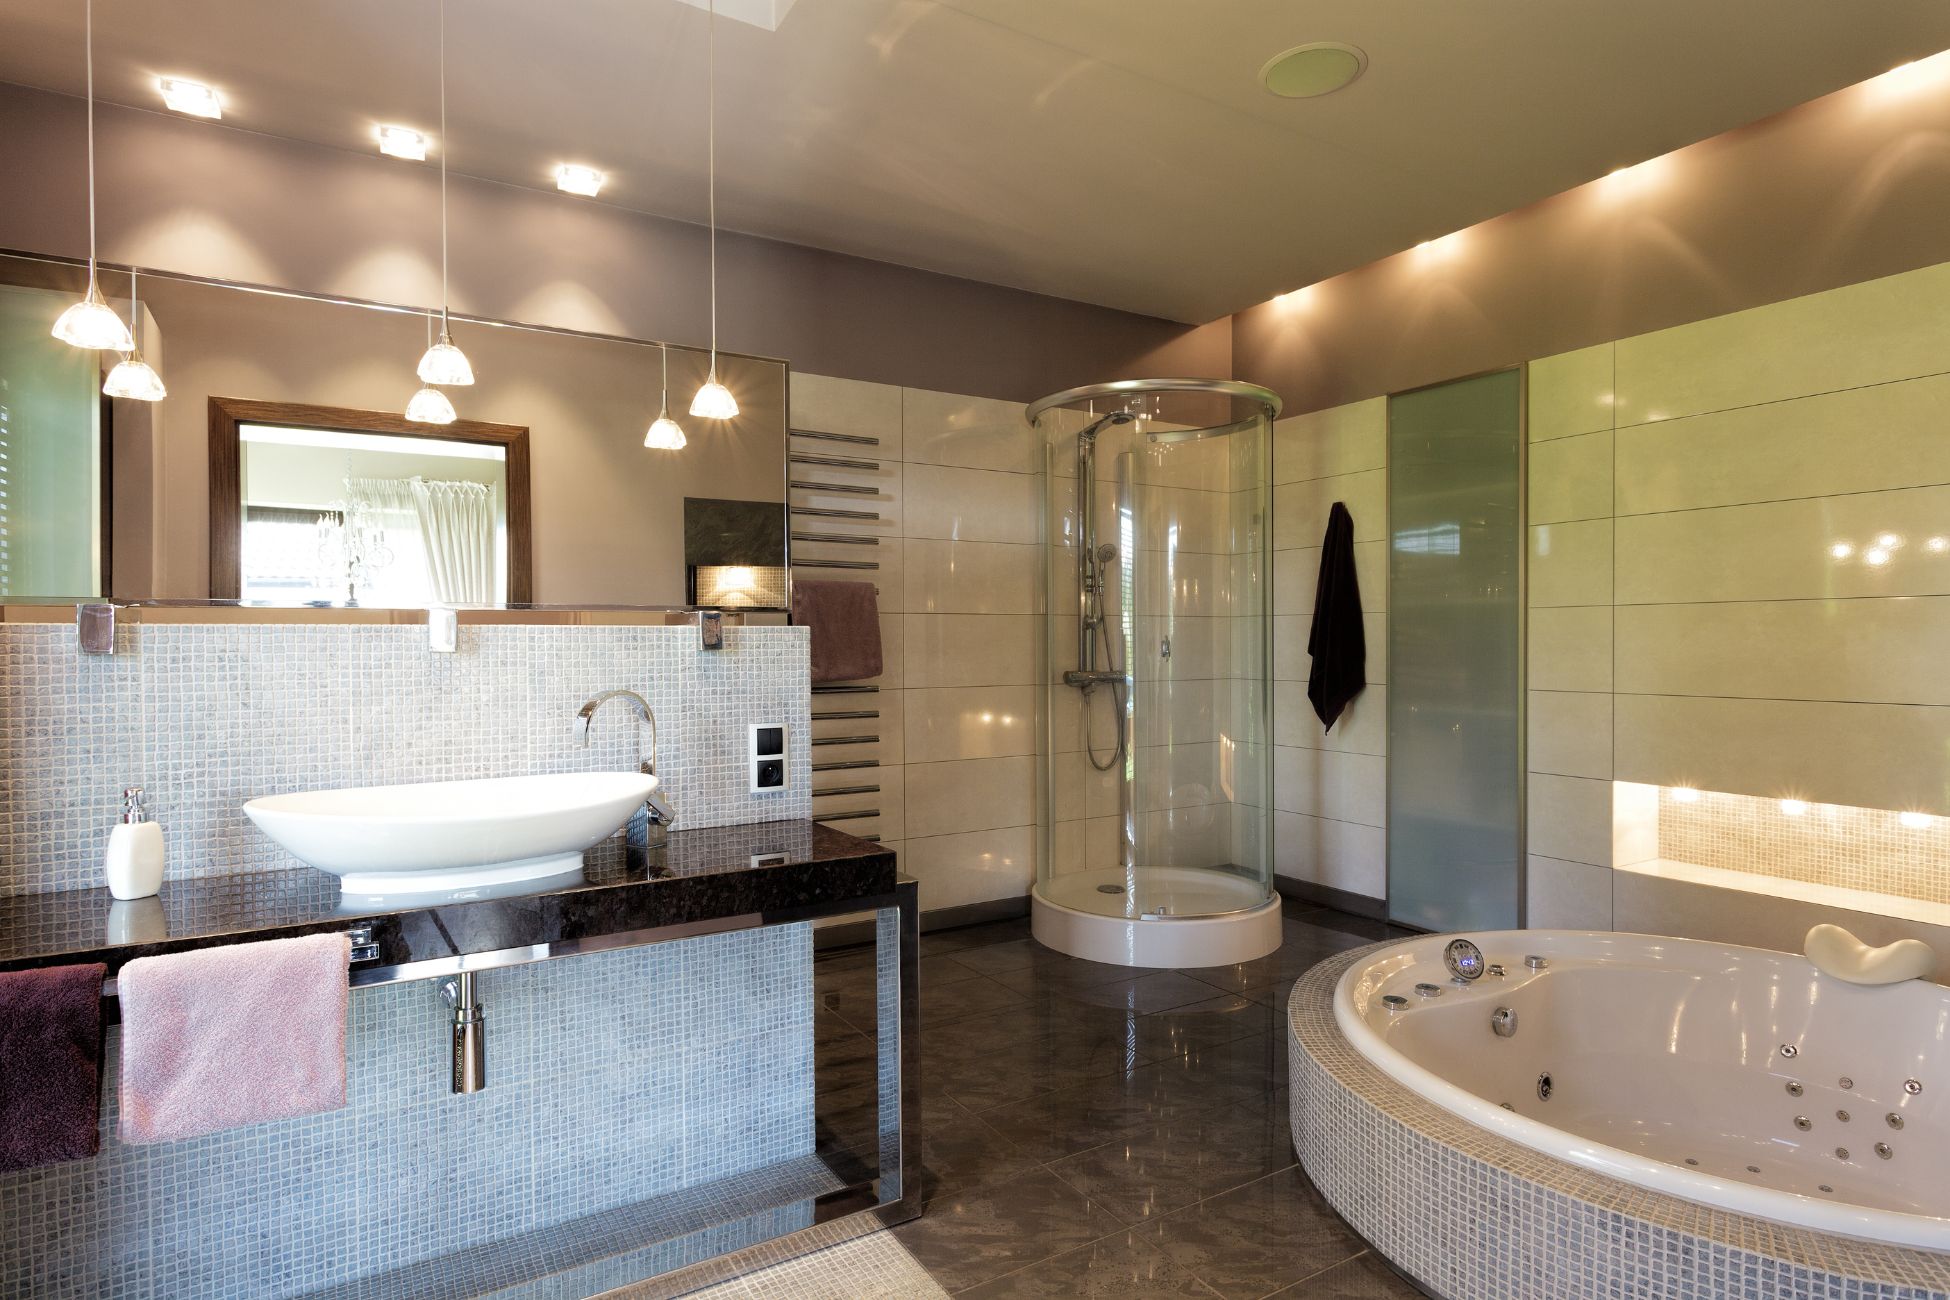 Modern style Bathroom with curved enclosure shower